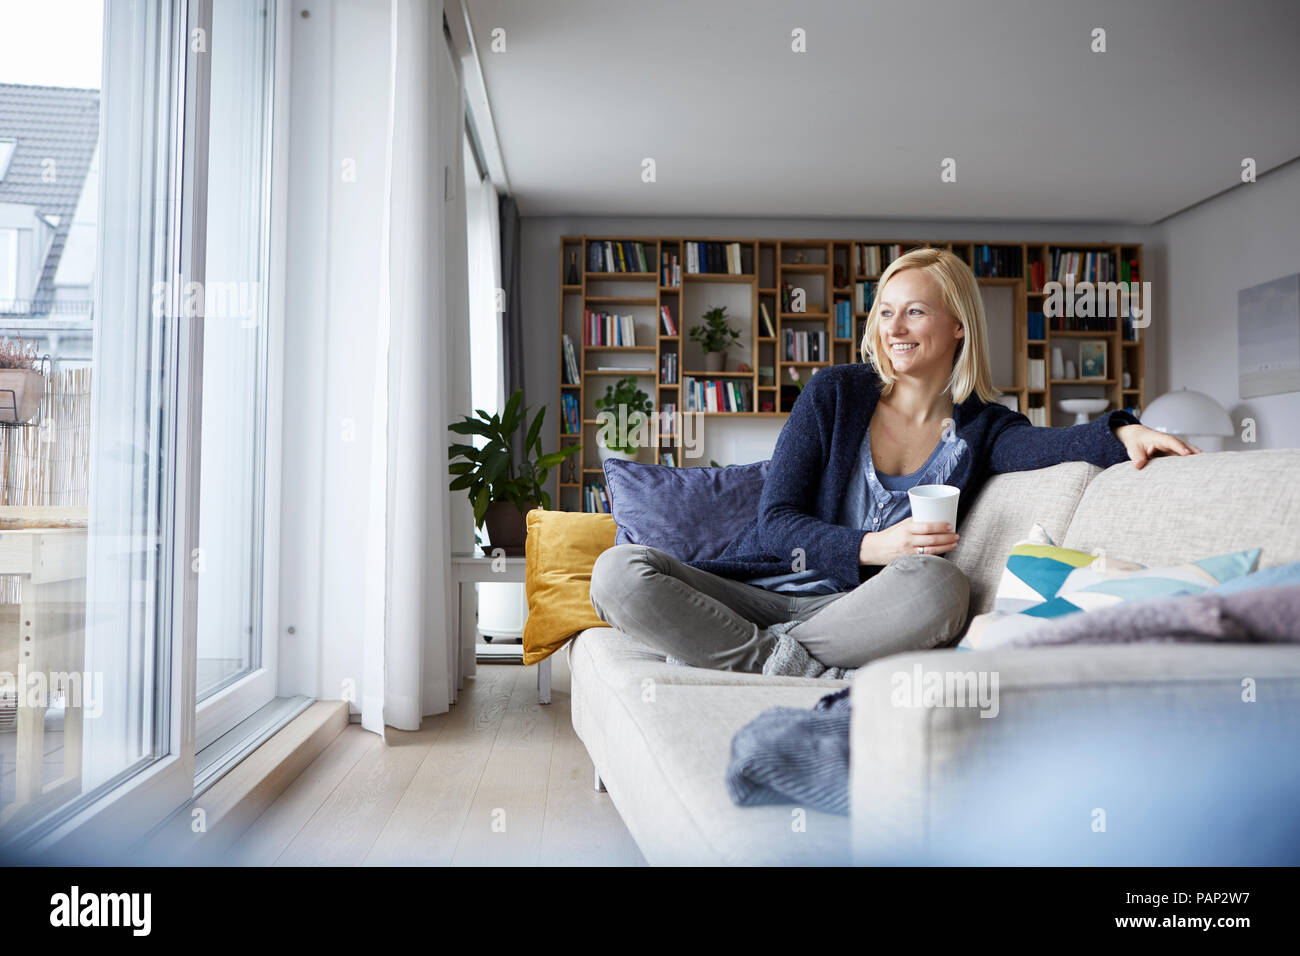 Woman relaxing at home, sitting on couch Banque D'Images